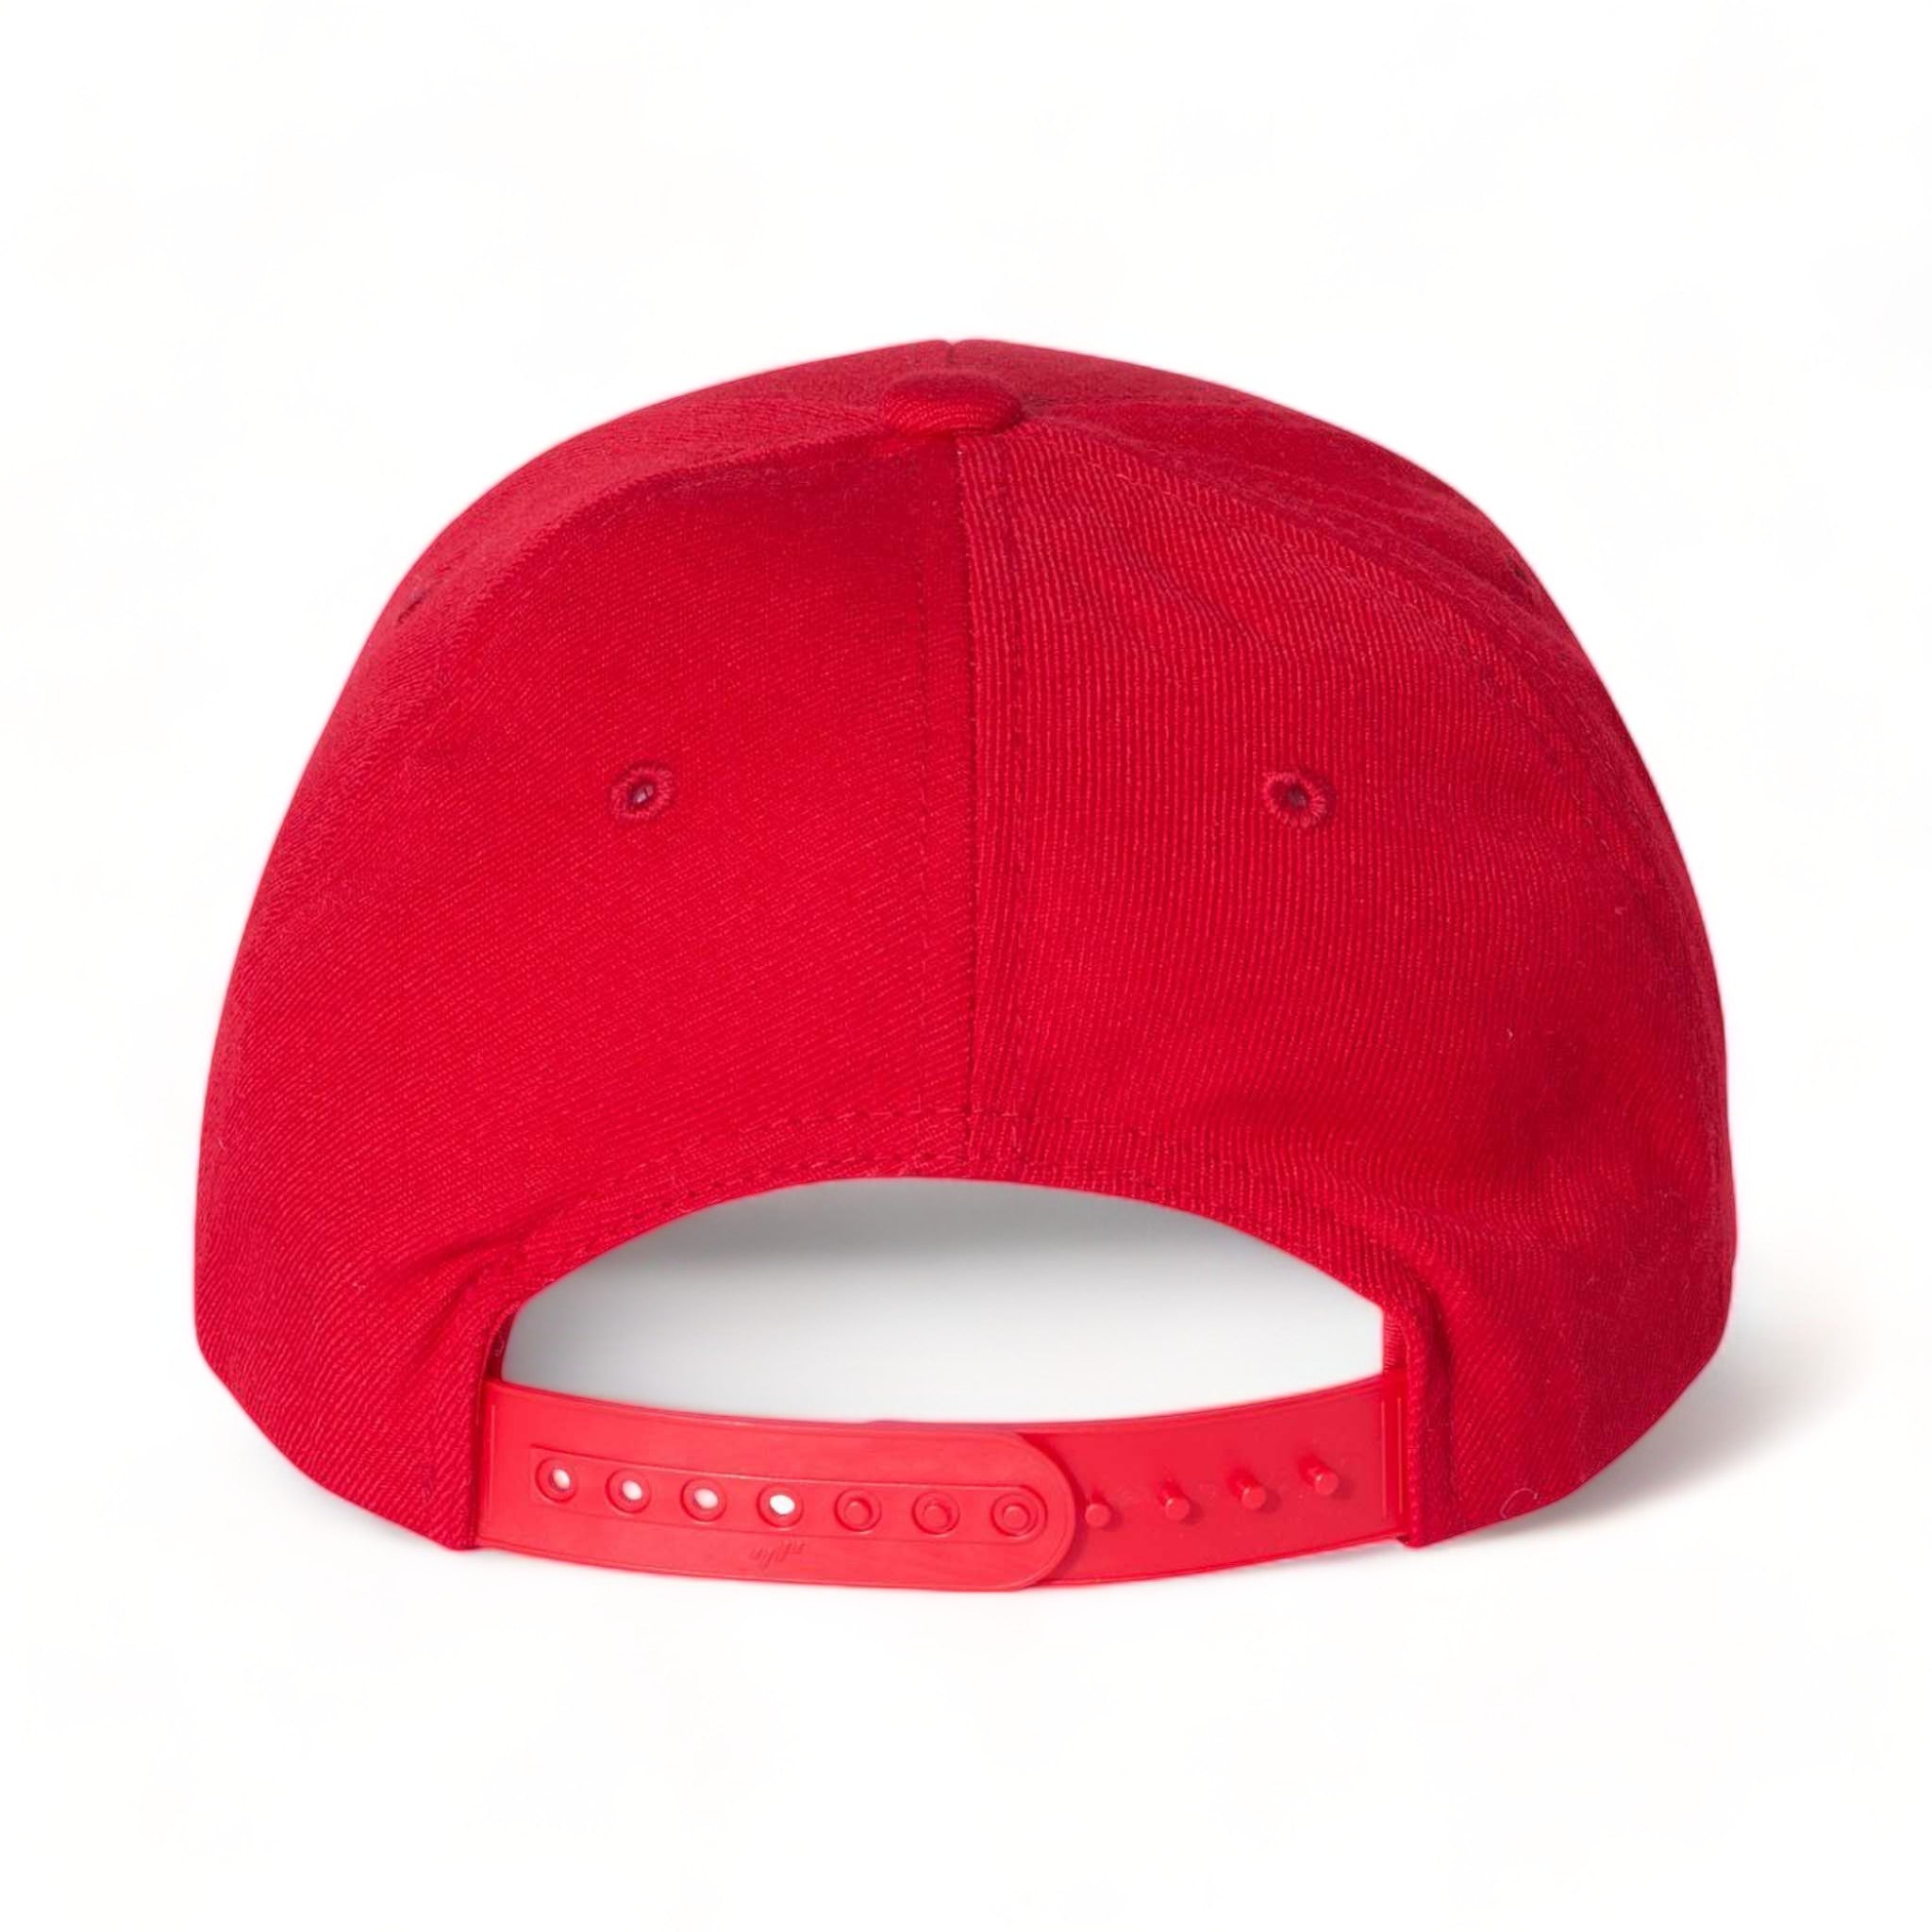 Back view of YP Classics 6789M custom hat in red